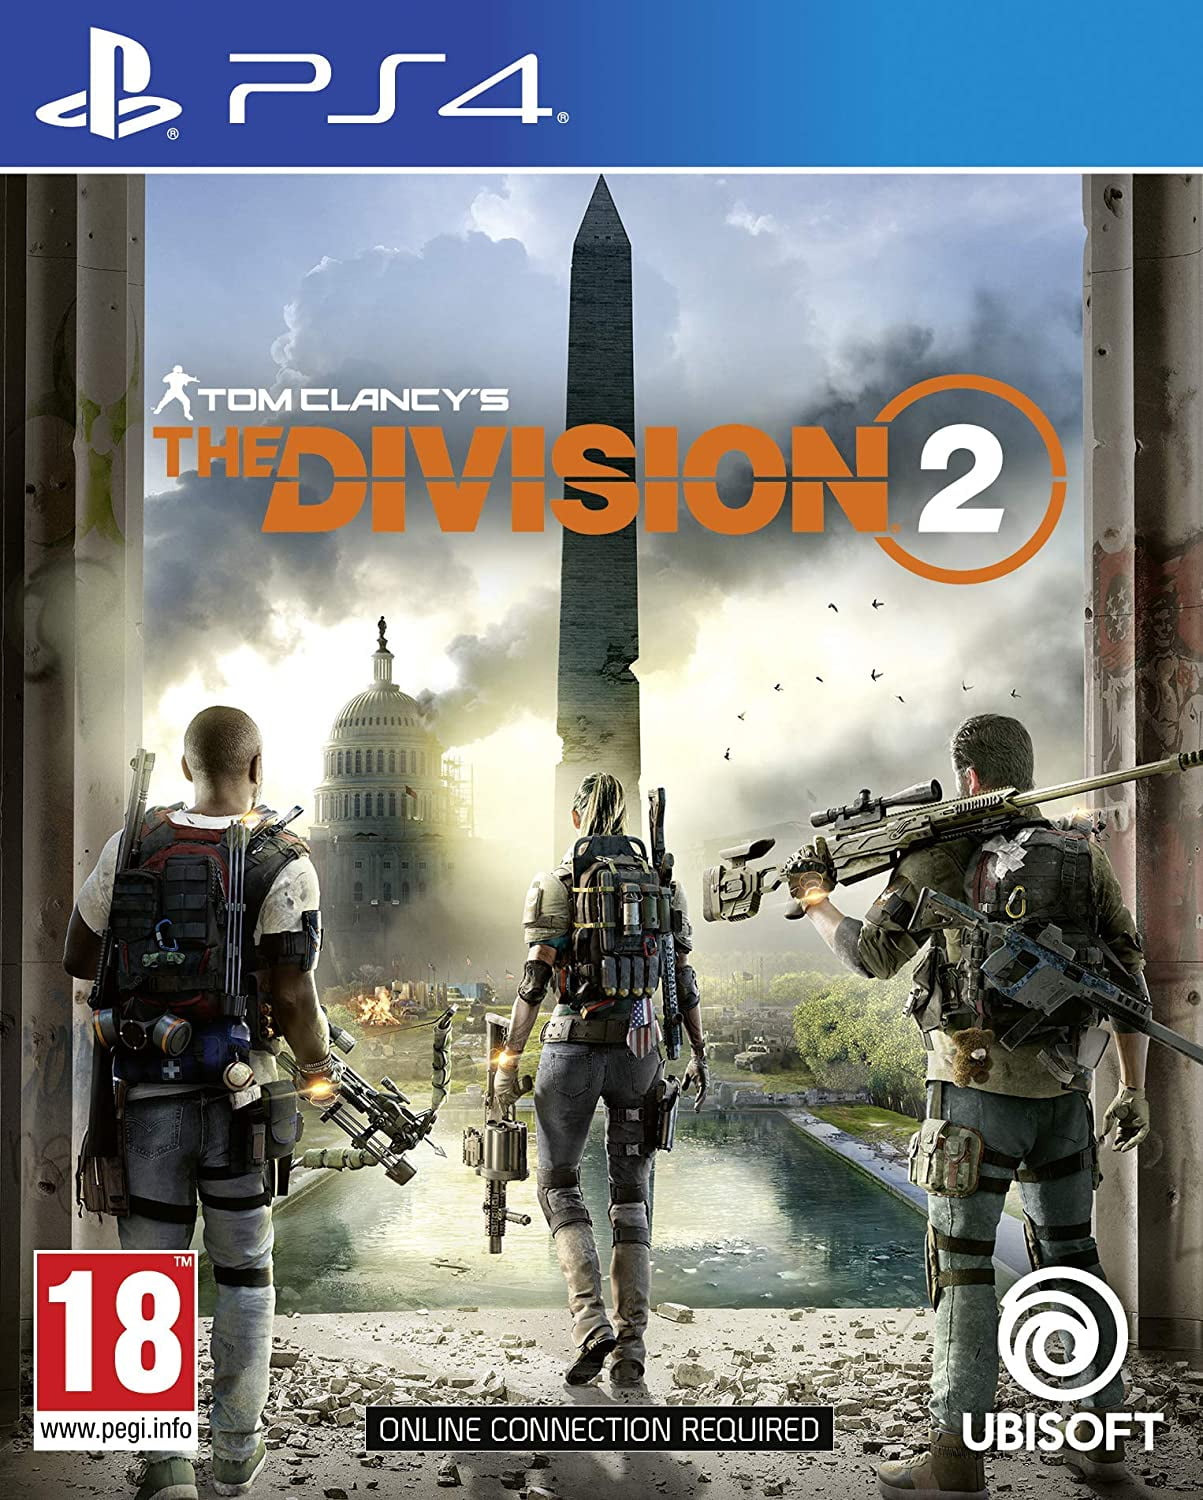 Tom Clancy's The Division 2 (PS4), Pre-order now and be the first to try the game with an exclusive access to the Private Beta*** By Visit the Ubisoft Store